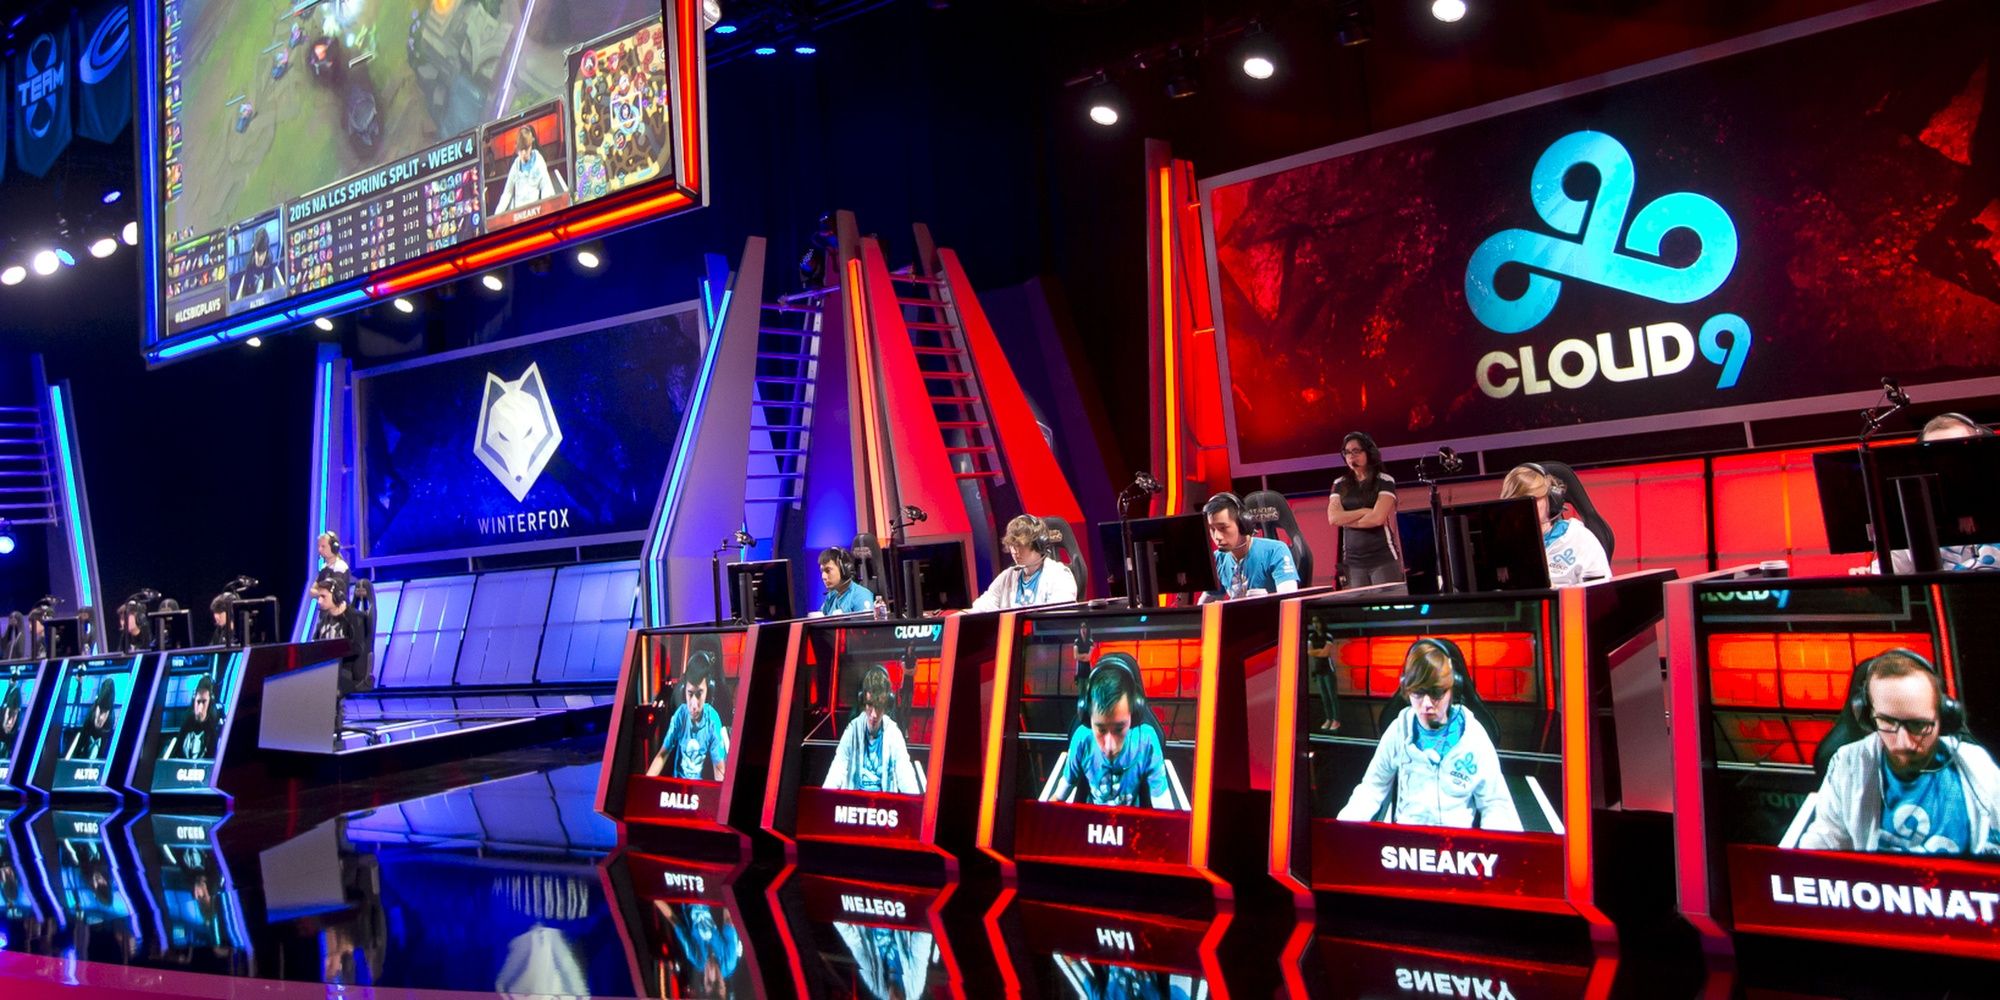 Cloud 9 vs. Winterfox NA LCS League of Legends shot from the stage